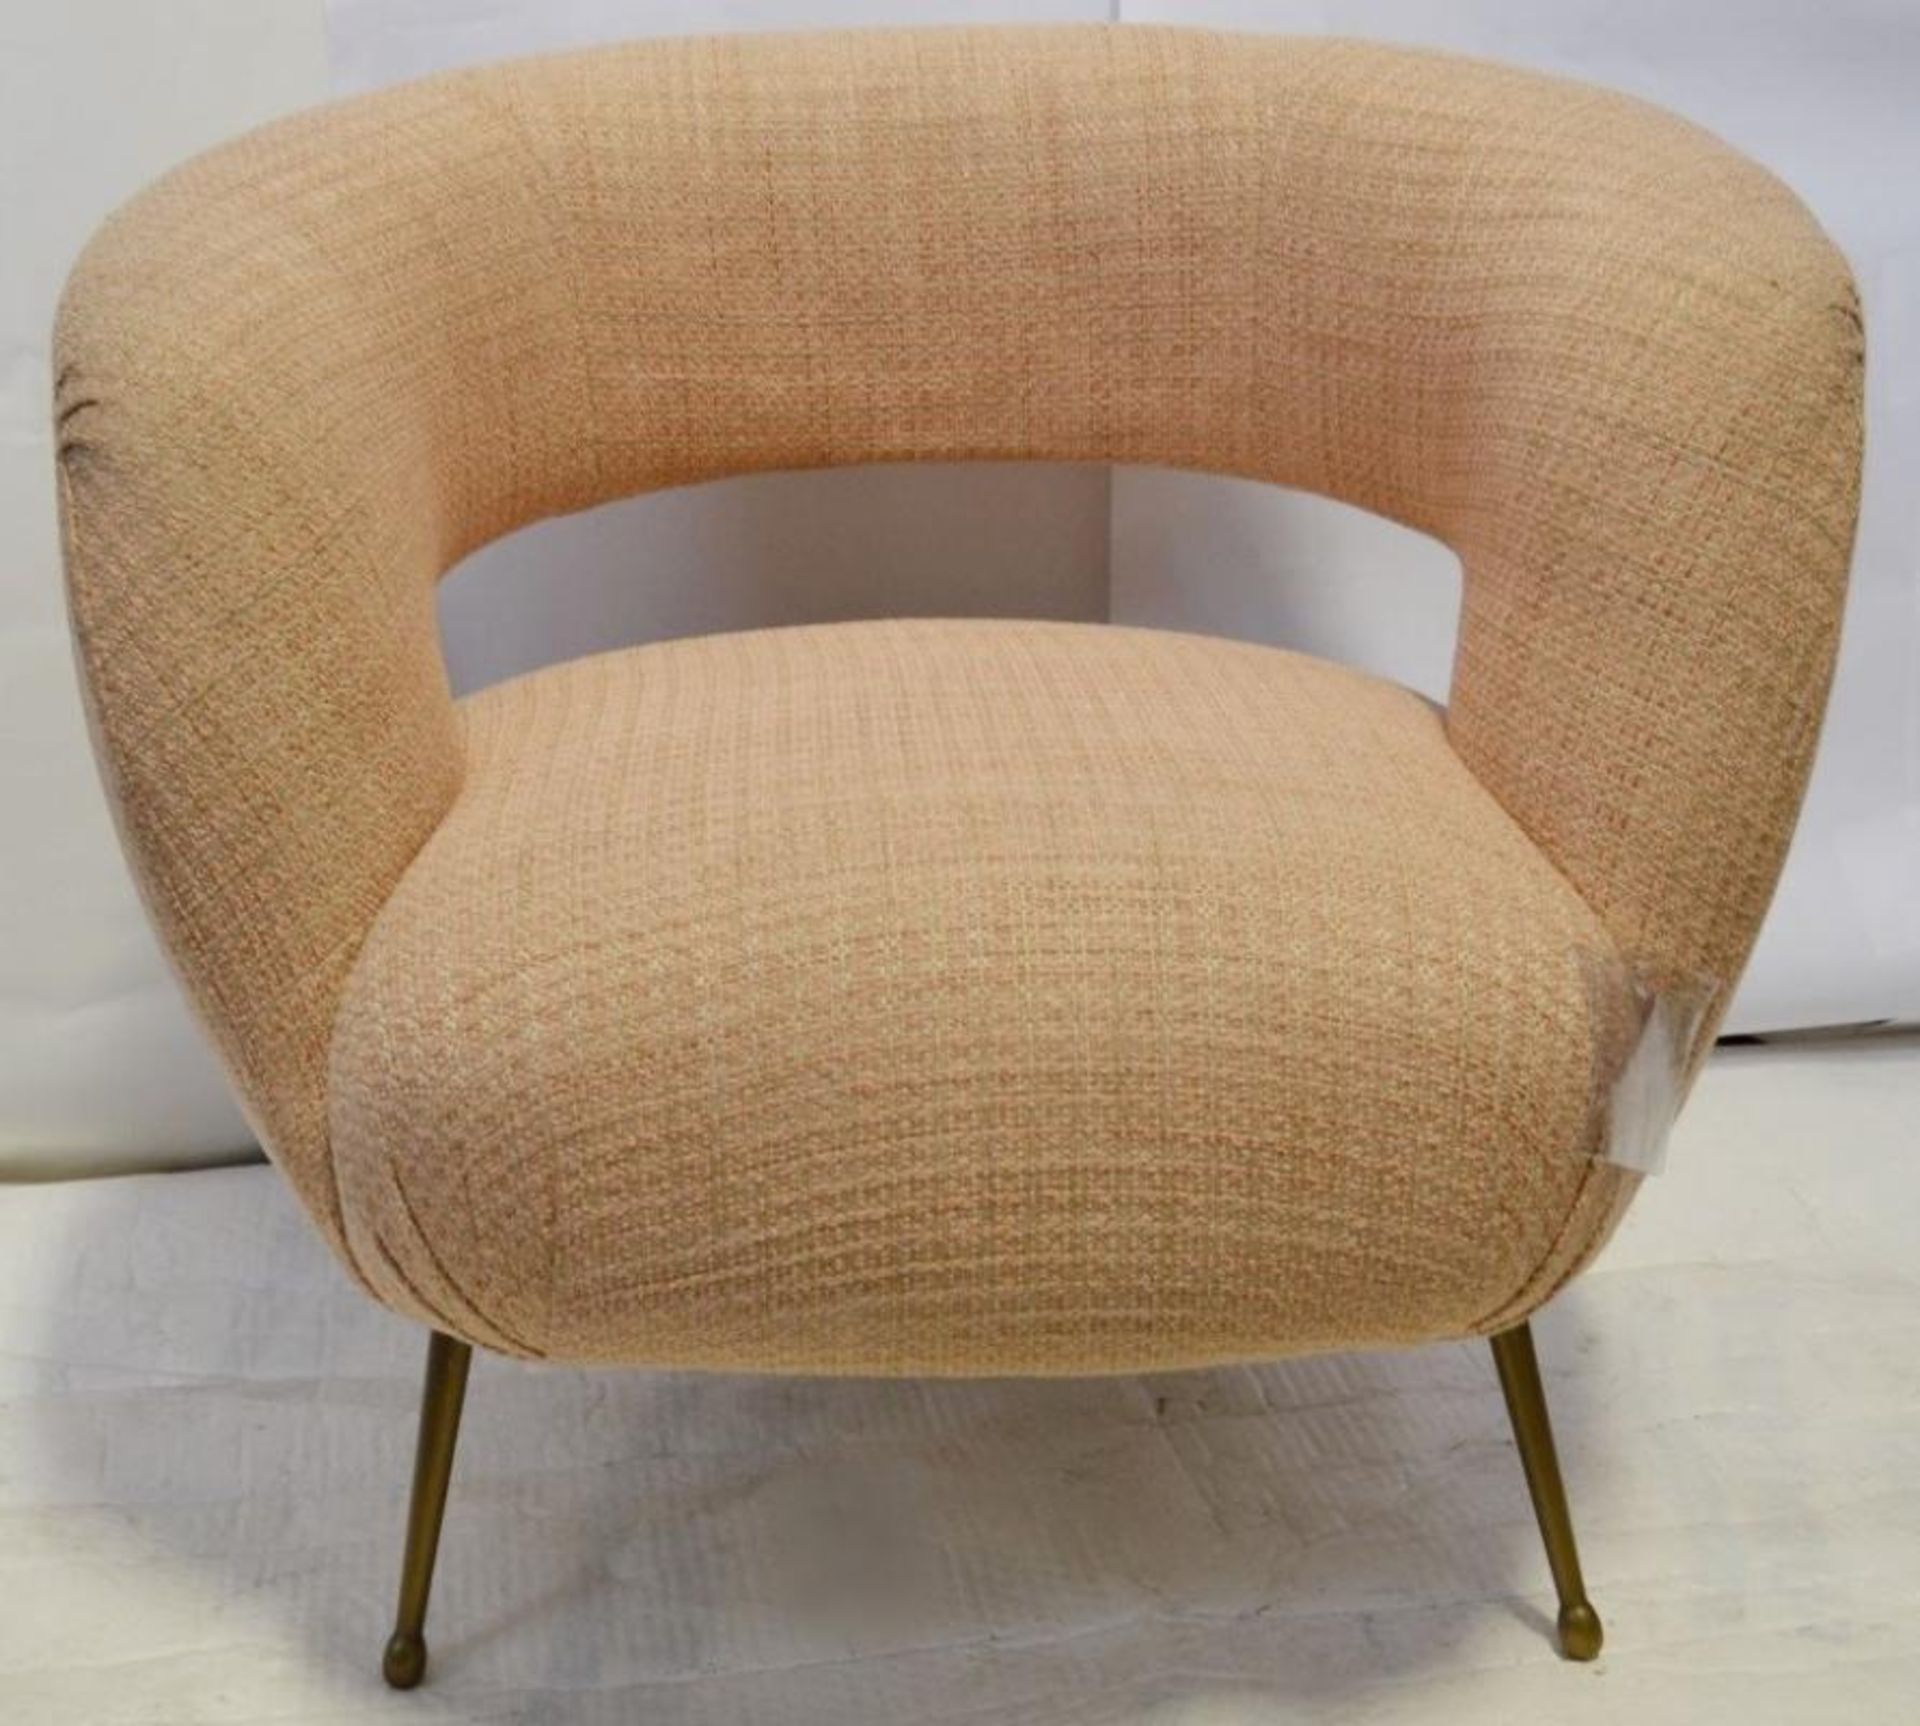 1 x KELLY WEARSTLER Laurel Lounge Chair With Brass Legs - Dimensions: 36"W x 31.5"D x 31.5"H - Great - Image 17 of 31